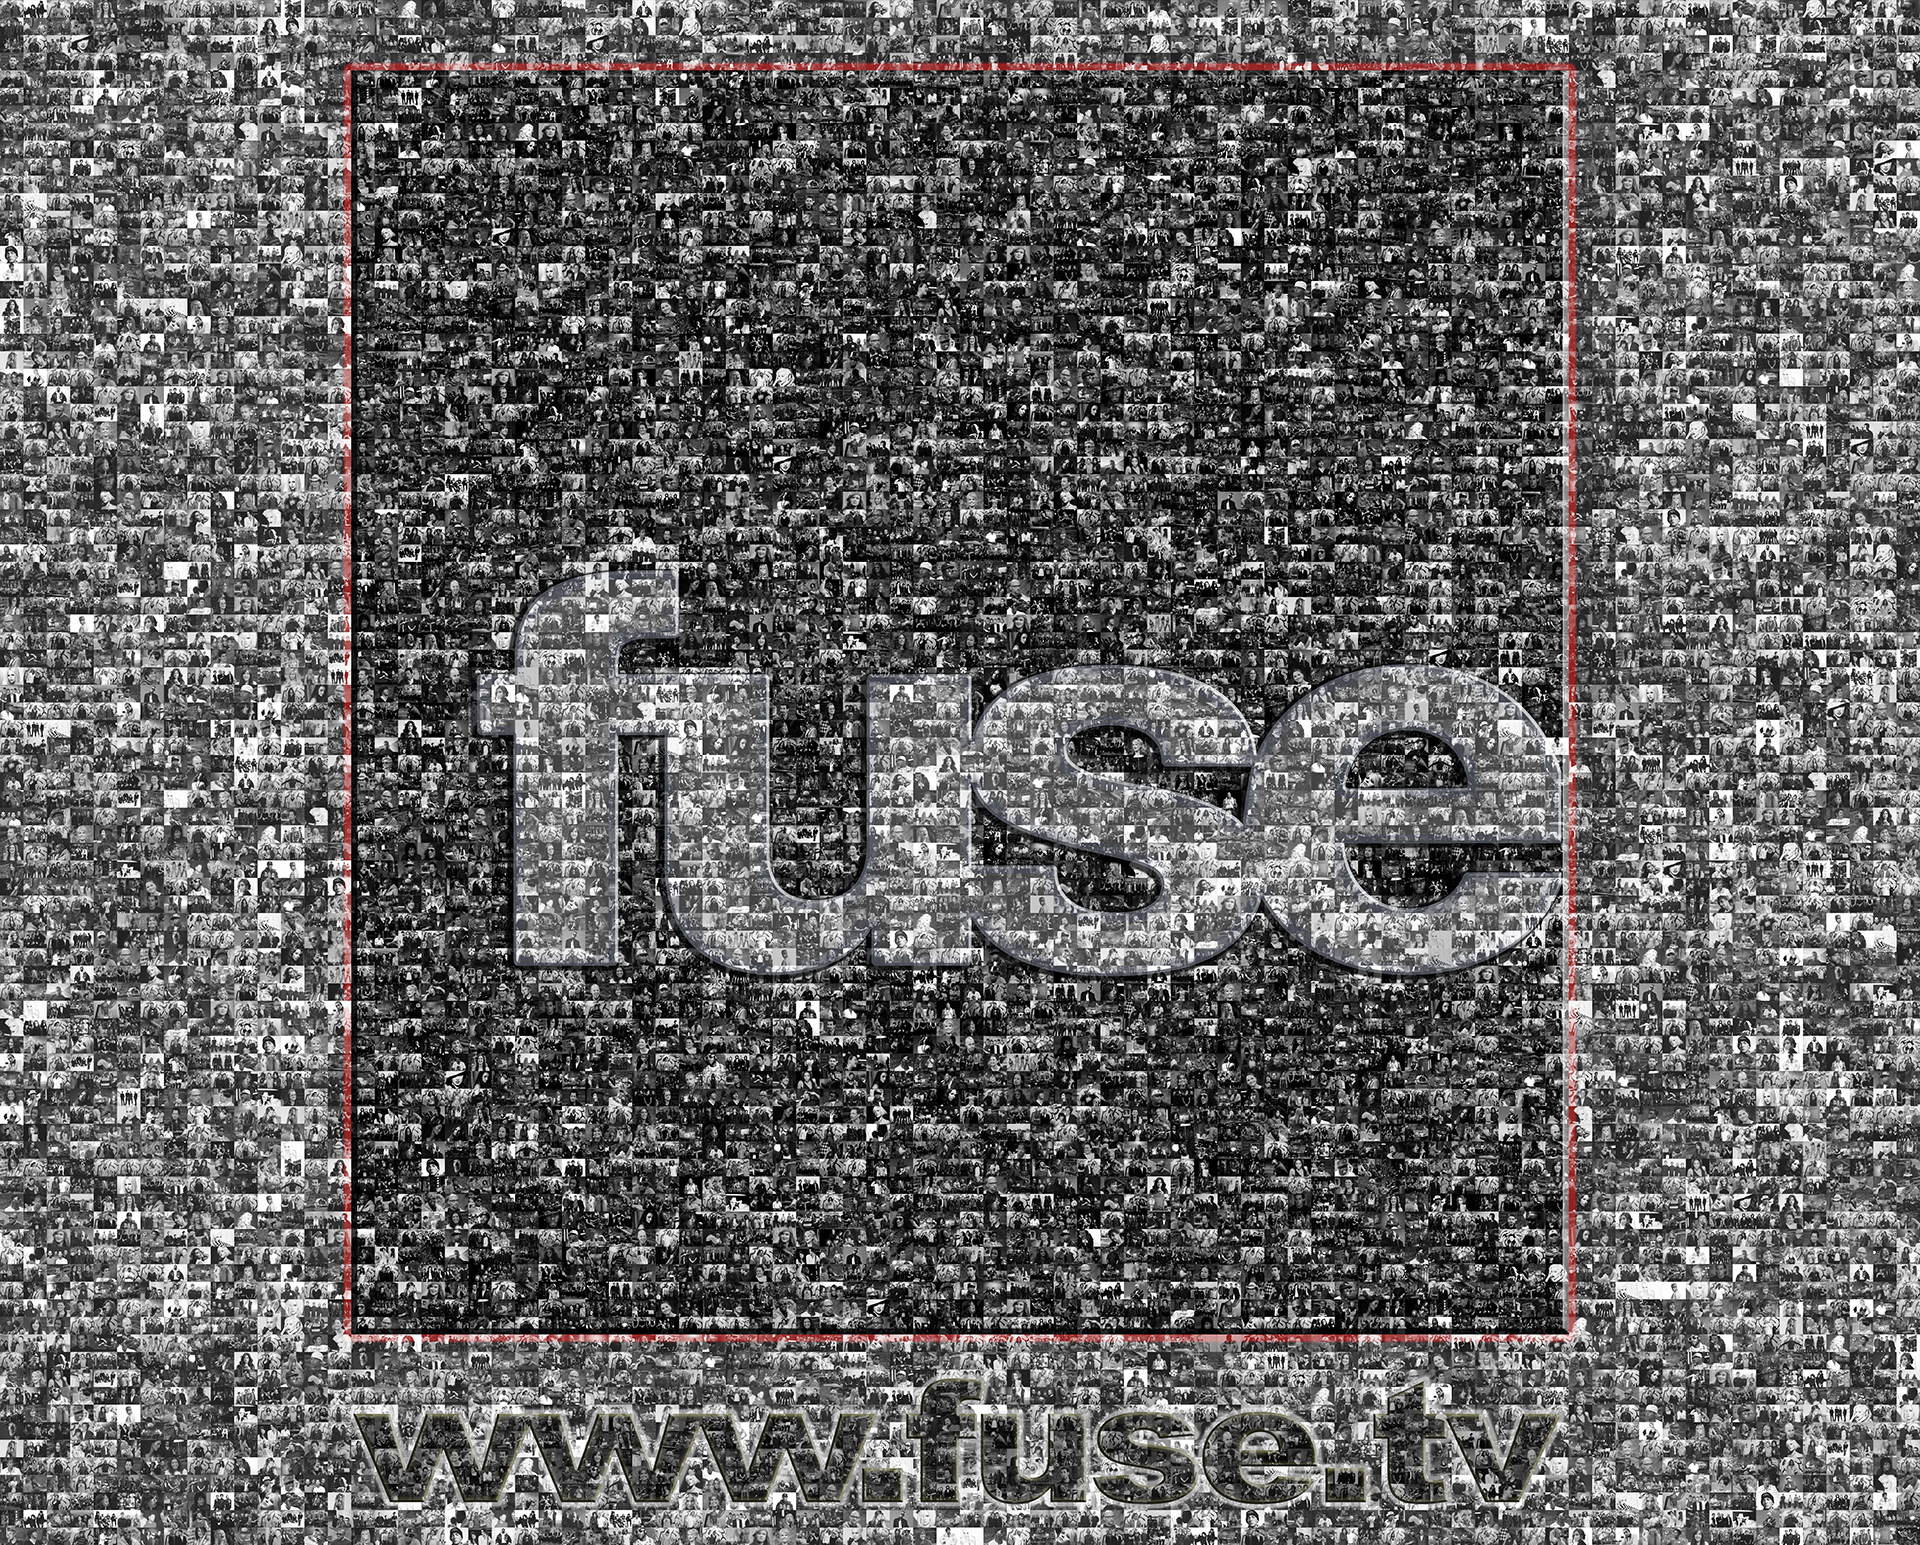 photo mosaic This 8ft x 10ft banner was created photos using thousands of photos from musical artist appearances on FuseTV.